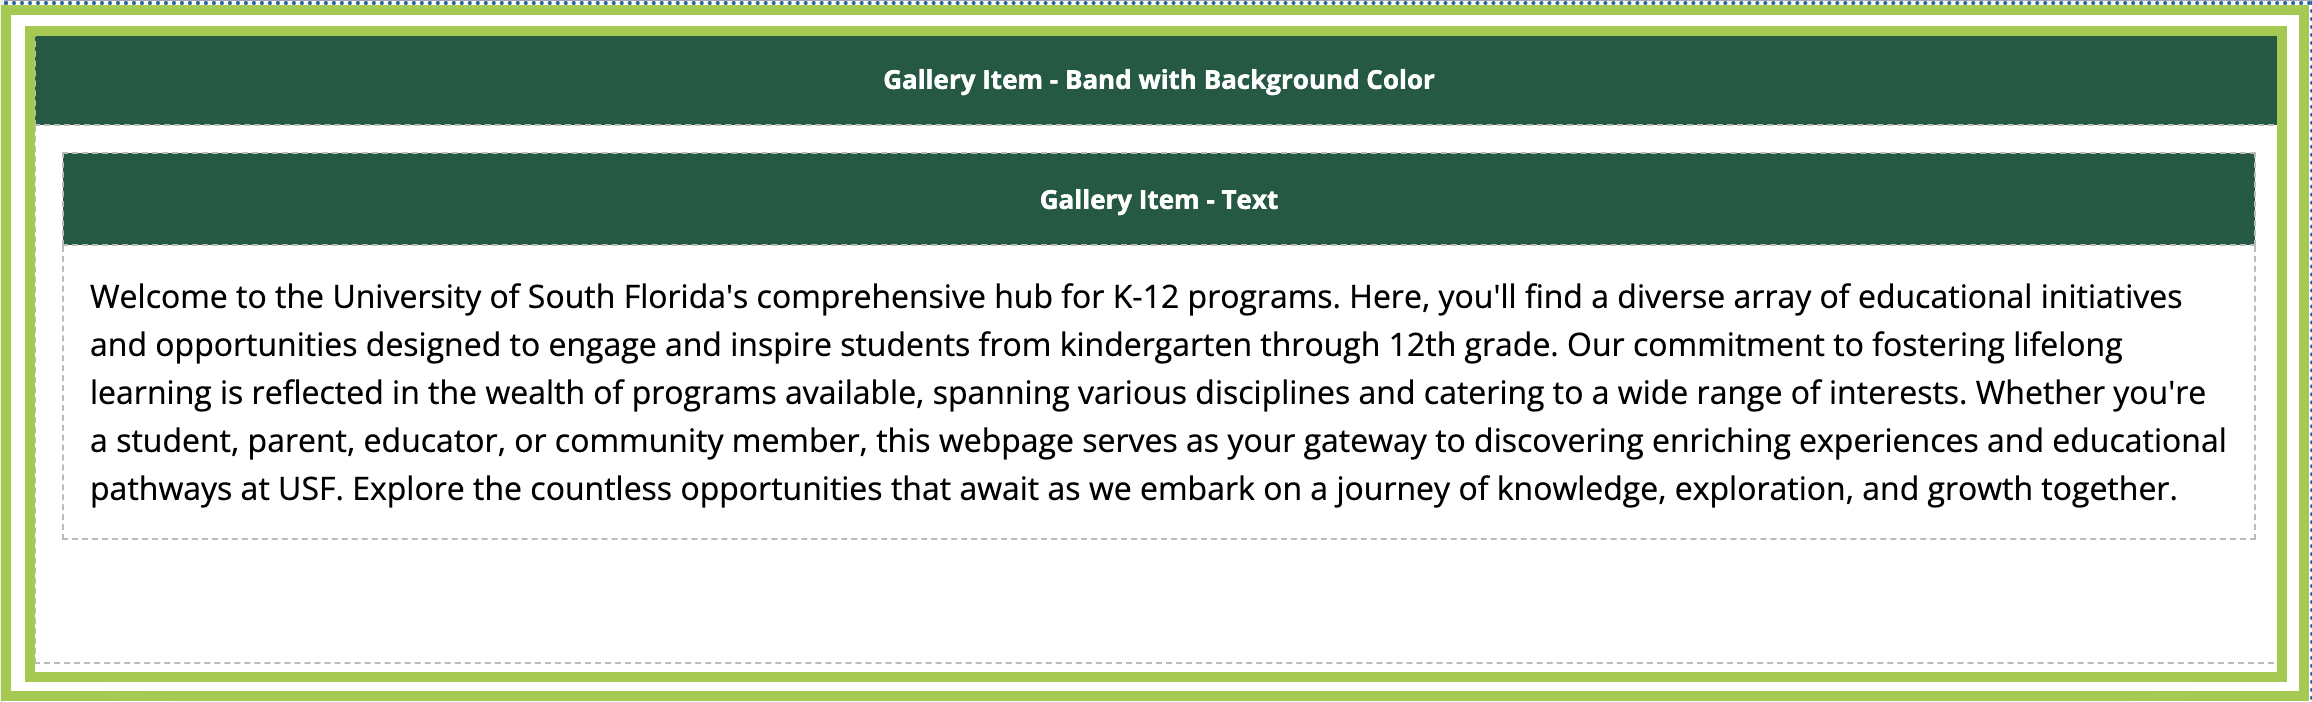 Editing view of Gallery Item - Text snippet inside a Gallery Item - Band with Background Color snippet.